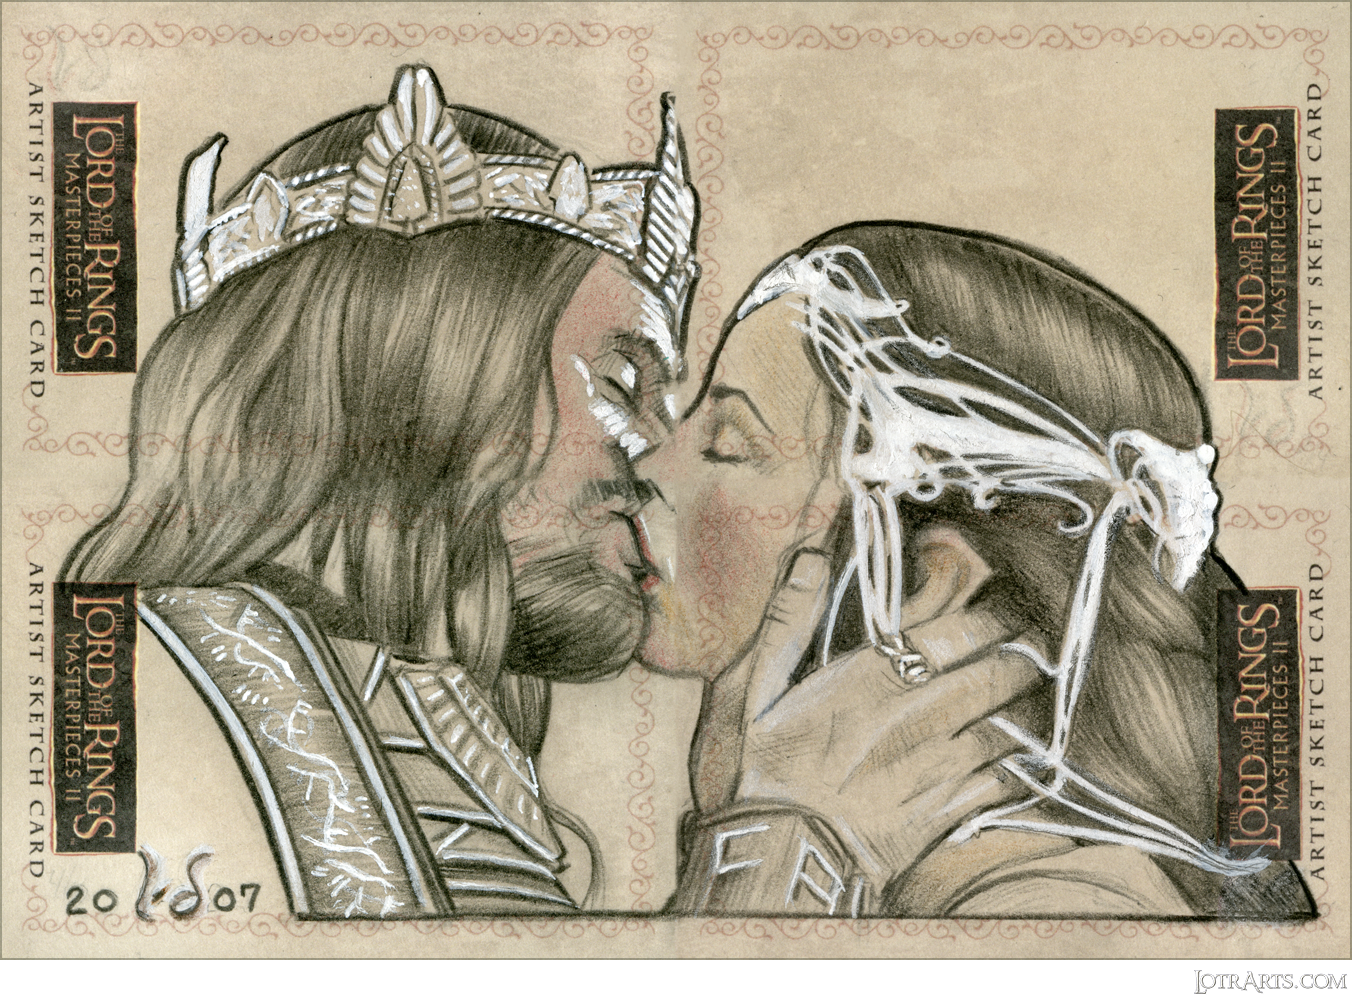 Aragorn and Arwen, four-card panel, by Doyle: artist return sketches<span class="ngViews">12 views</span>